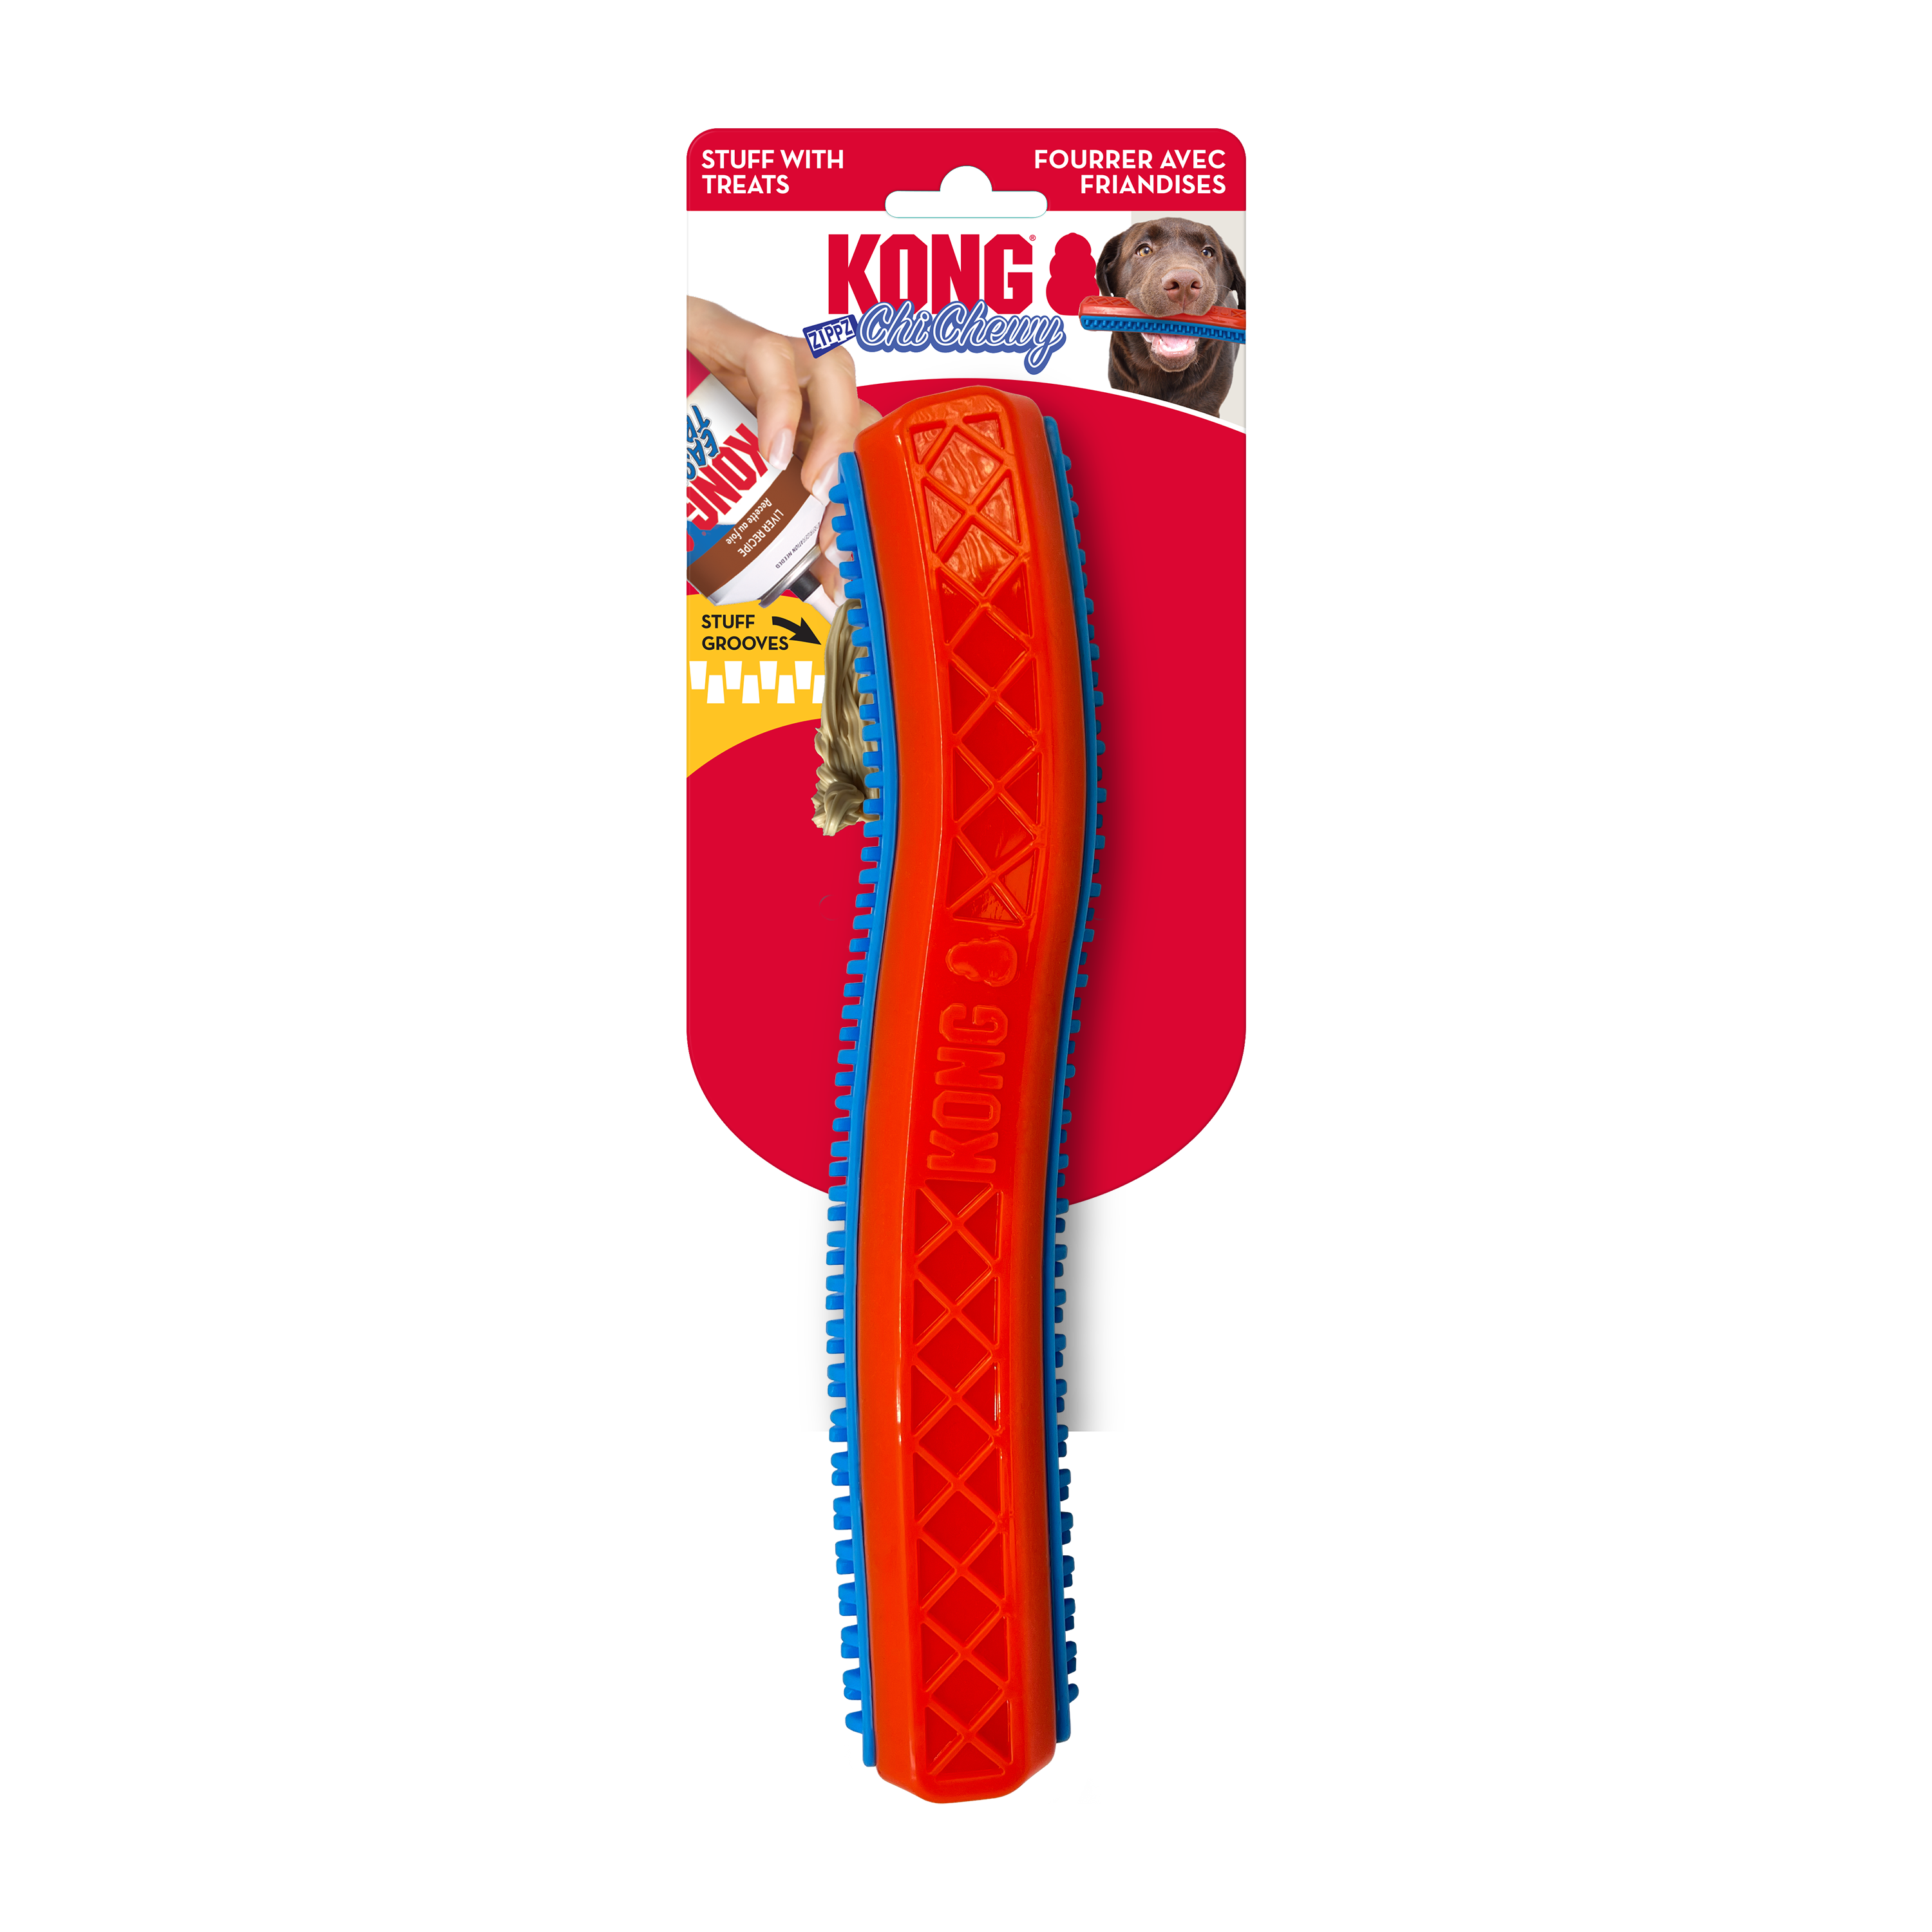 ChiChewy Zippz Stick onpack product image